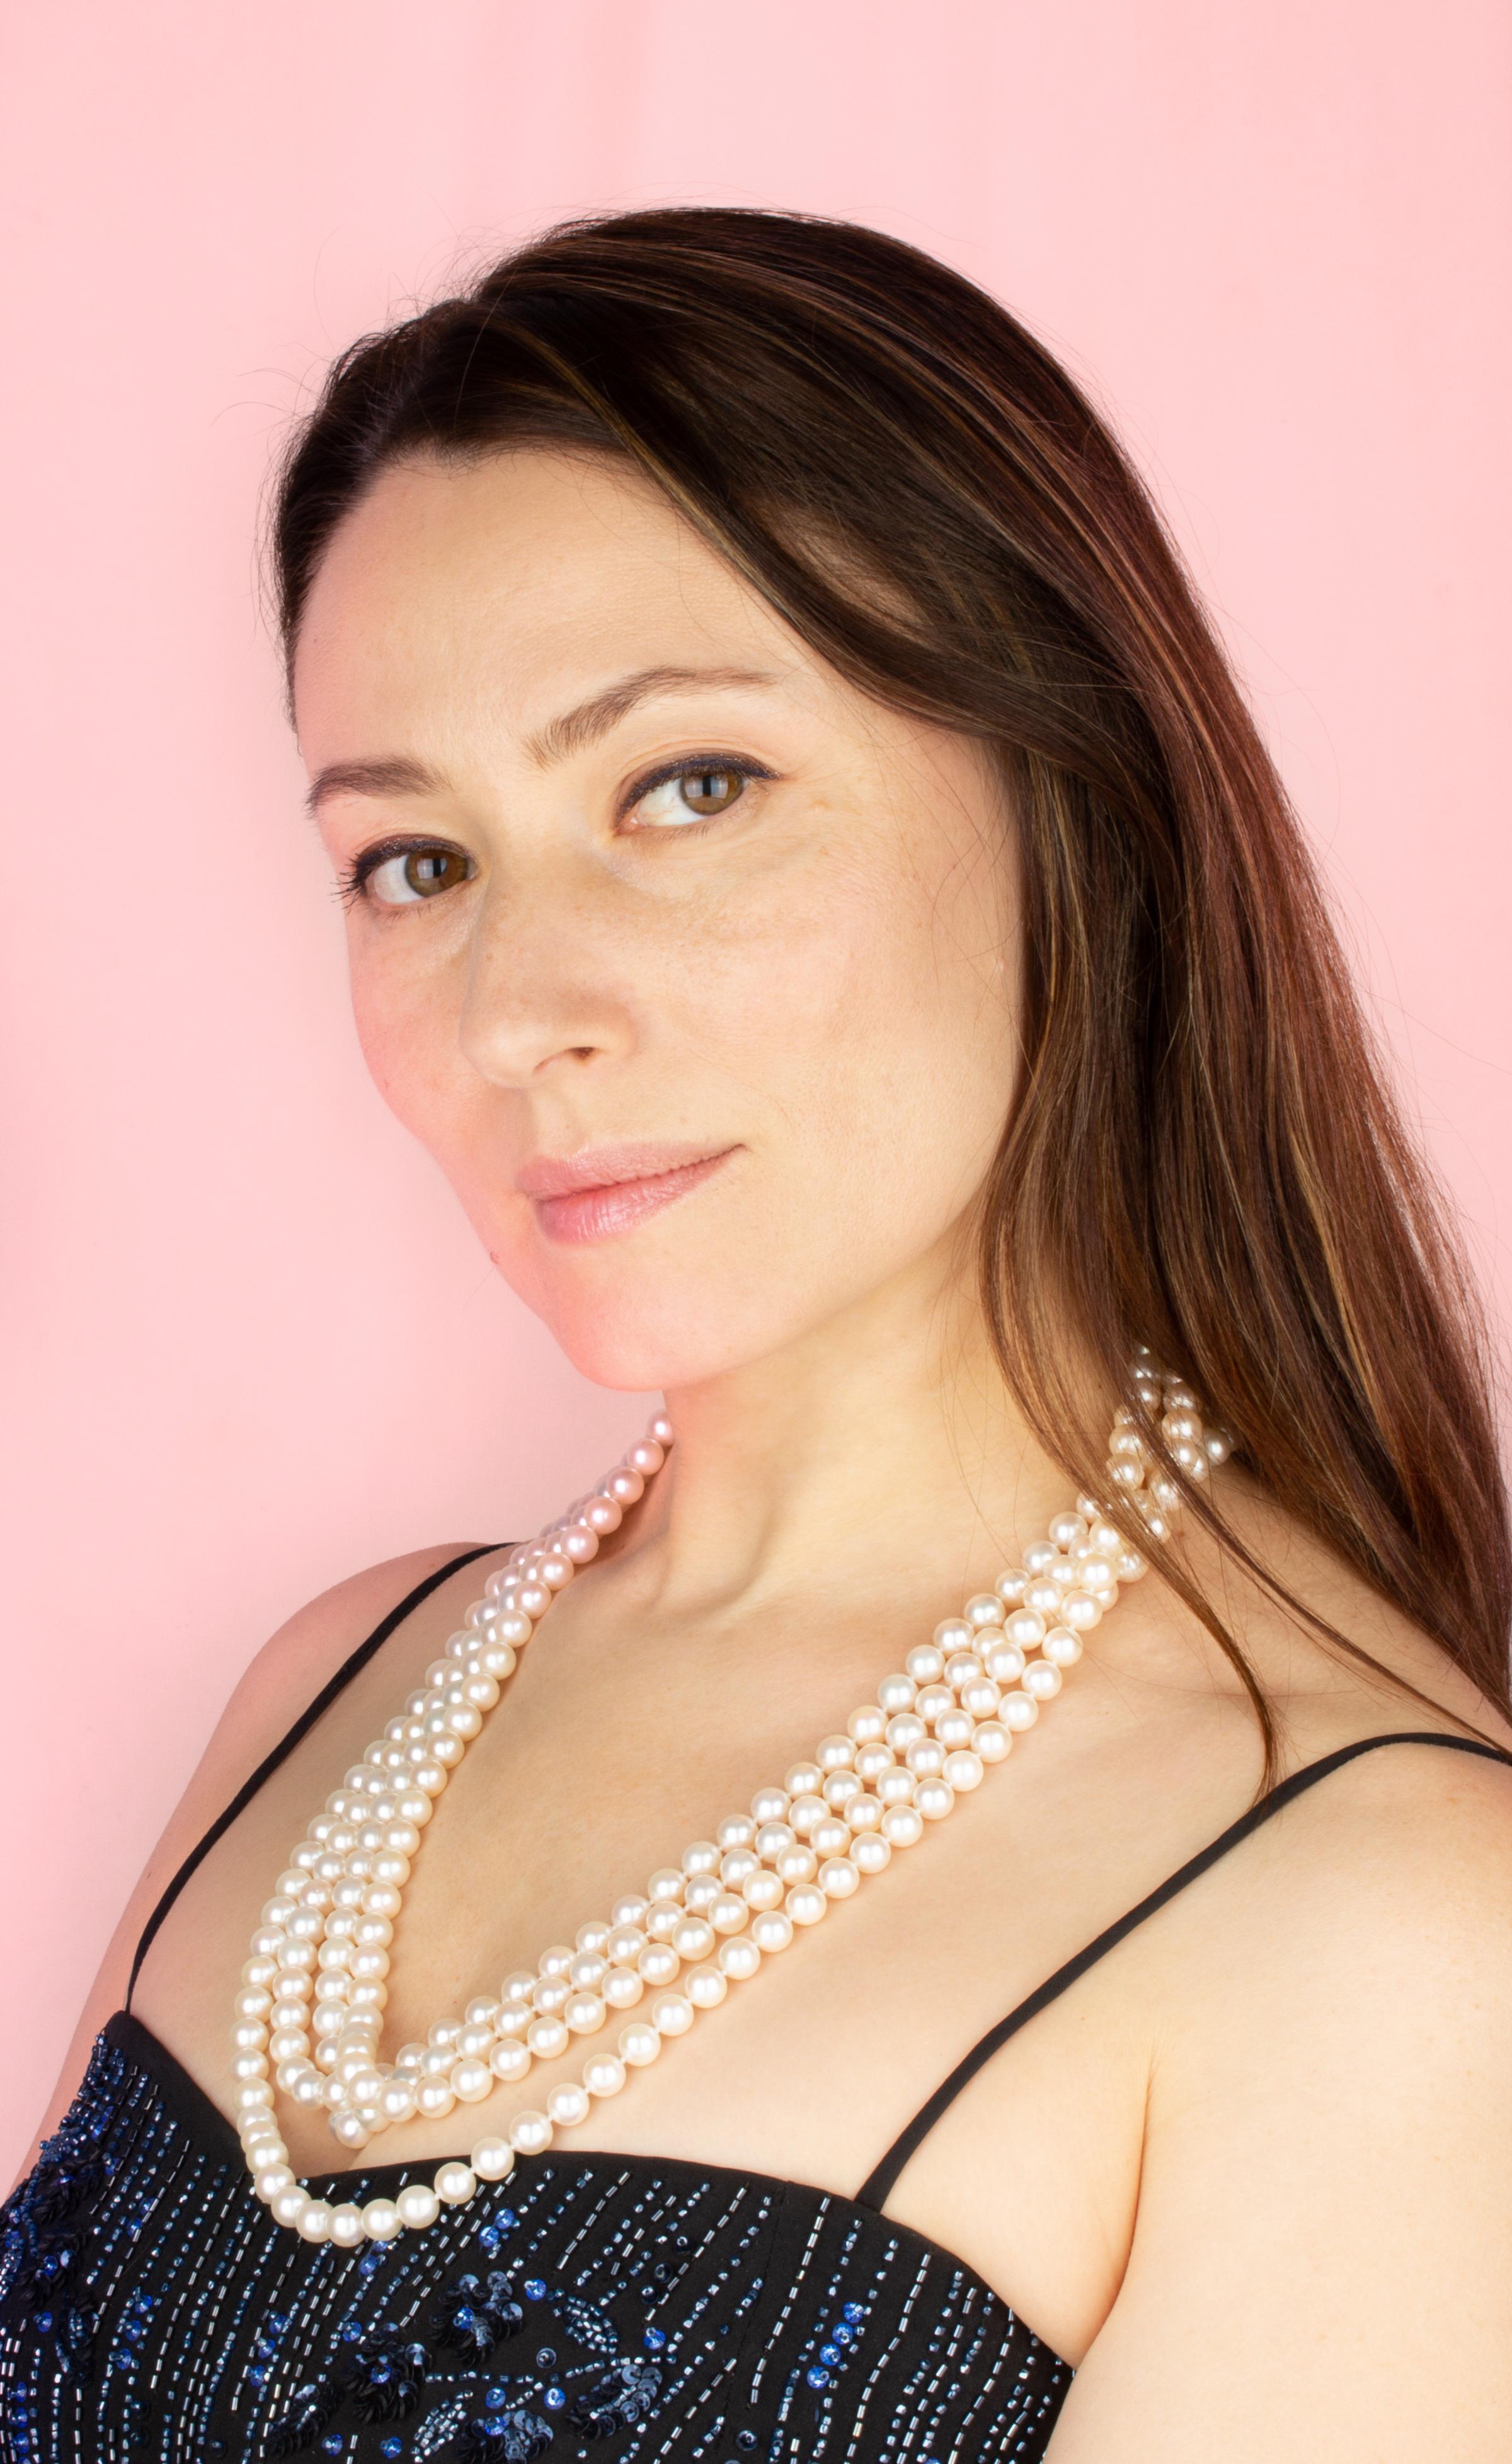 The 104” Japanese Akoya pearl necklace consists of 302 homogeneous round pearls (Pinctada Fucata) of 8mm diameter. The pearls display an attractive nacre, lustre, and iridescence. The necklace is held together by a handmade 18 carat white gold clasp